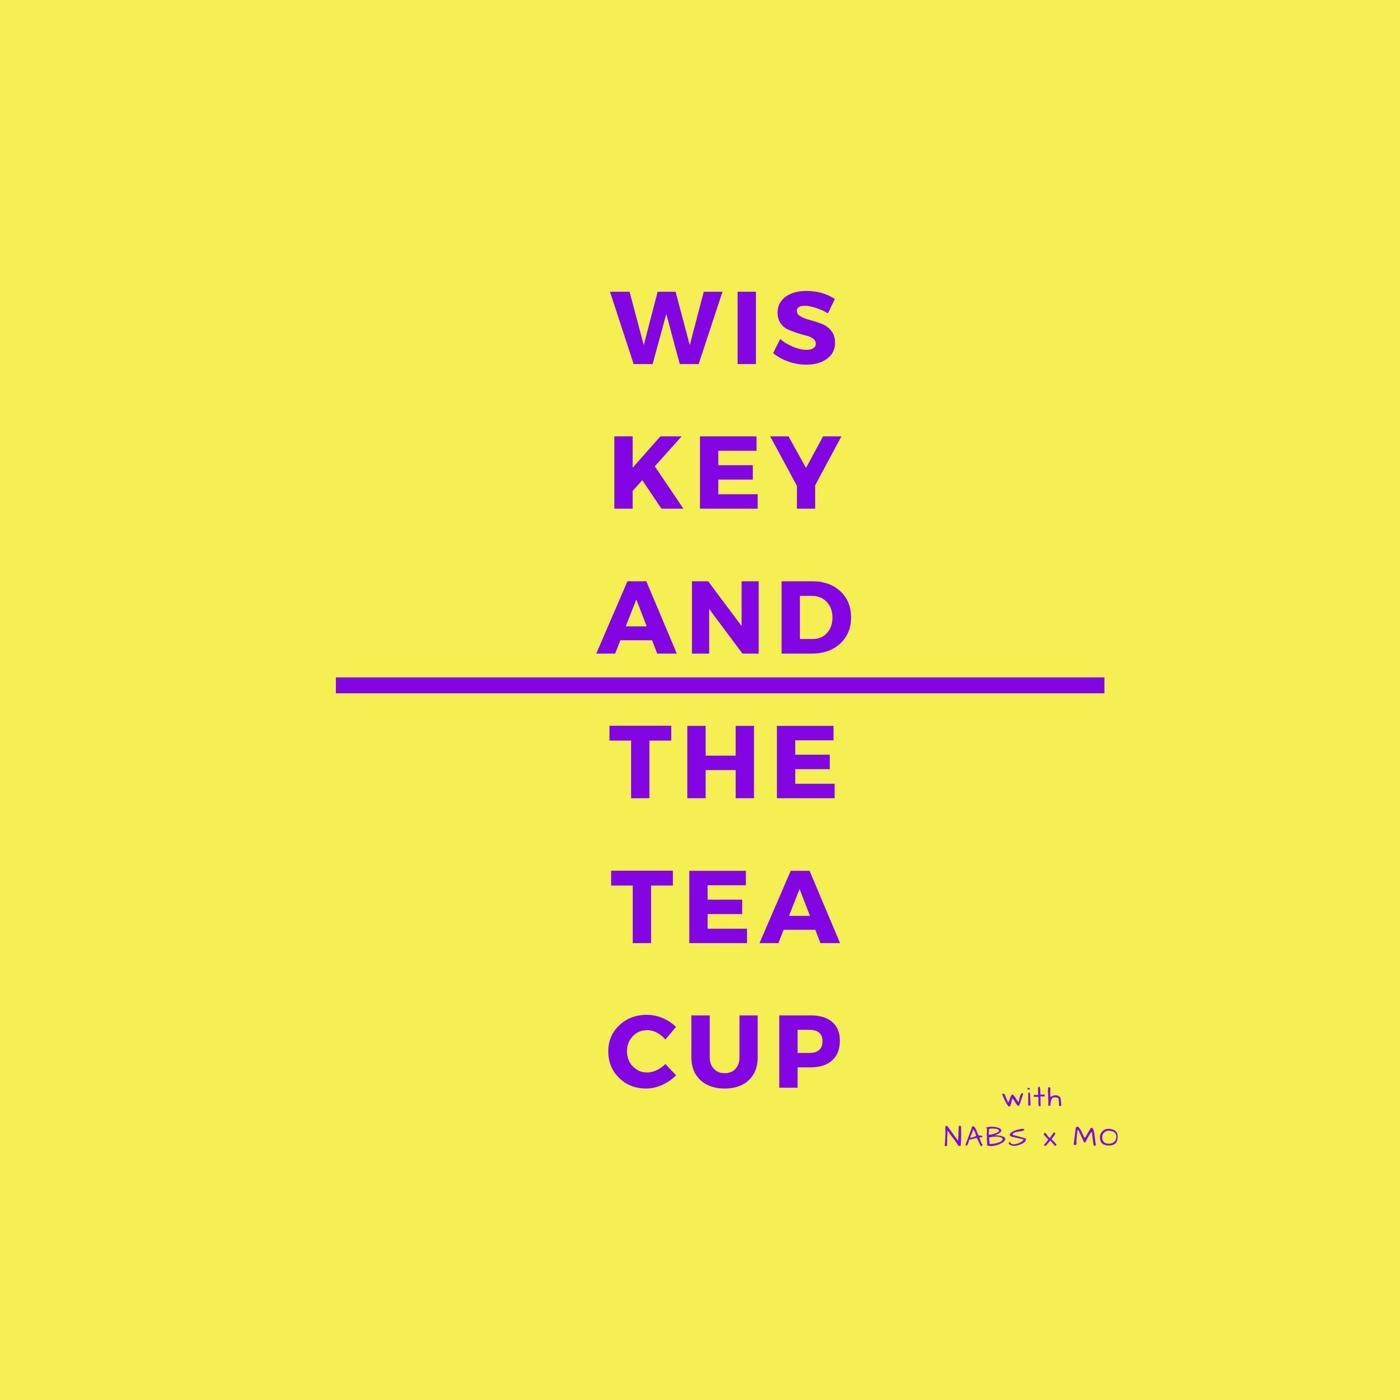 Wiskey and the Teacup